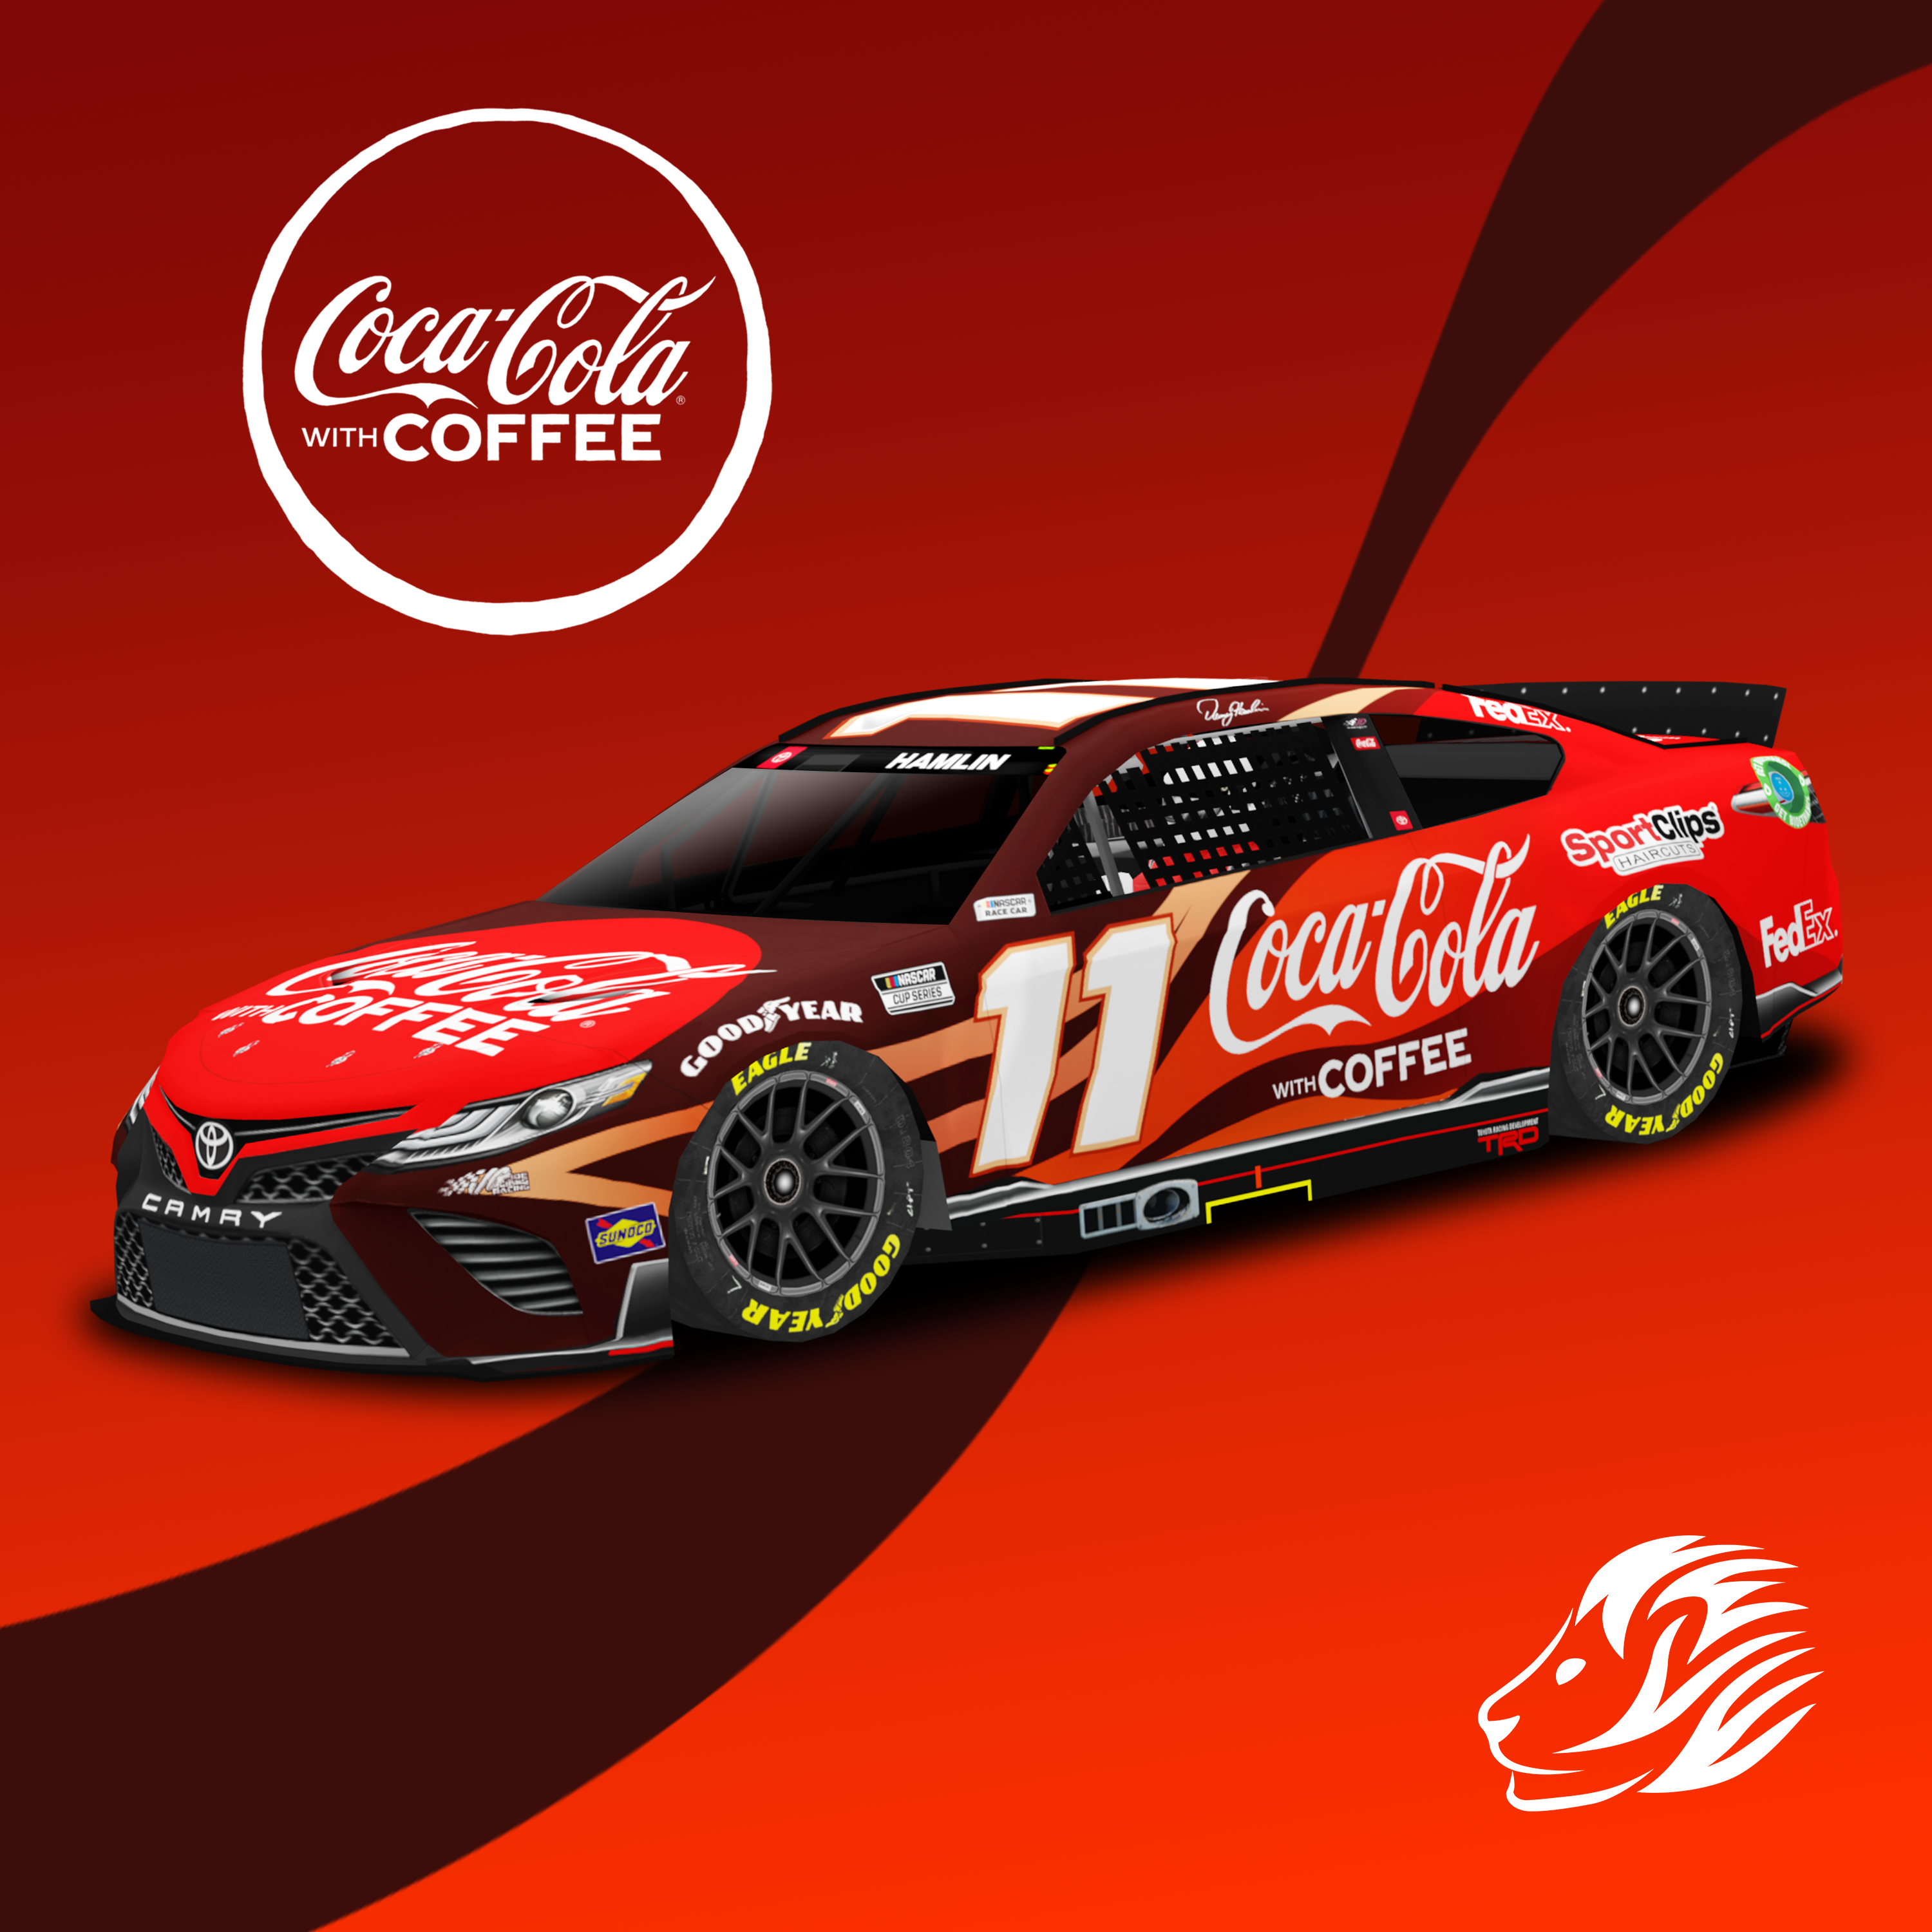 11 coca cola with coffee.png